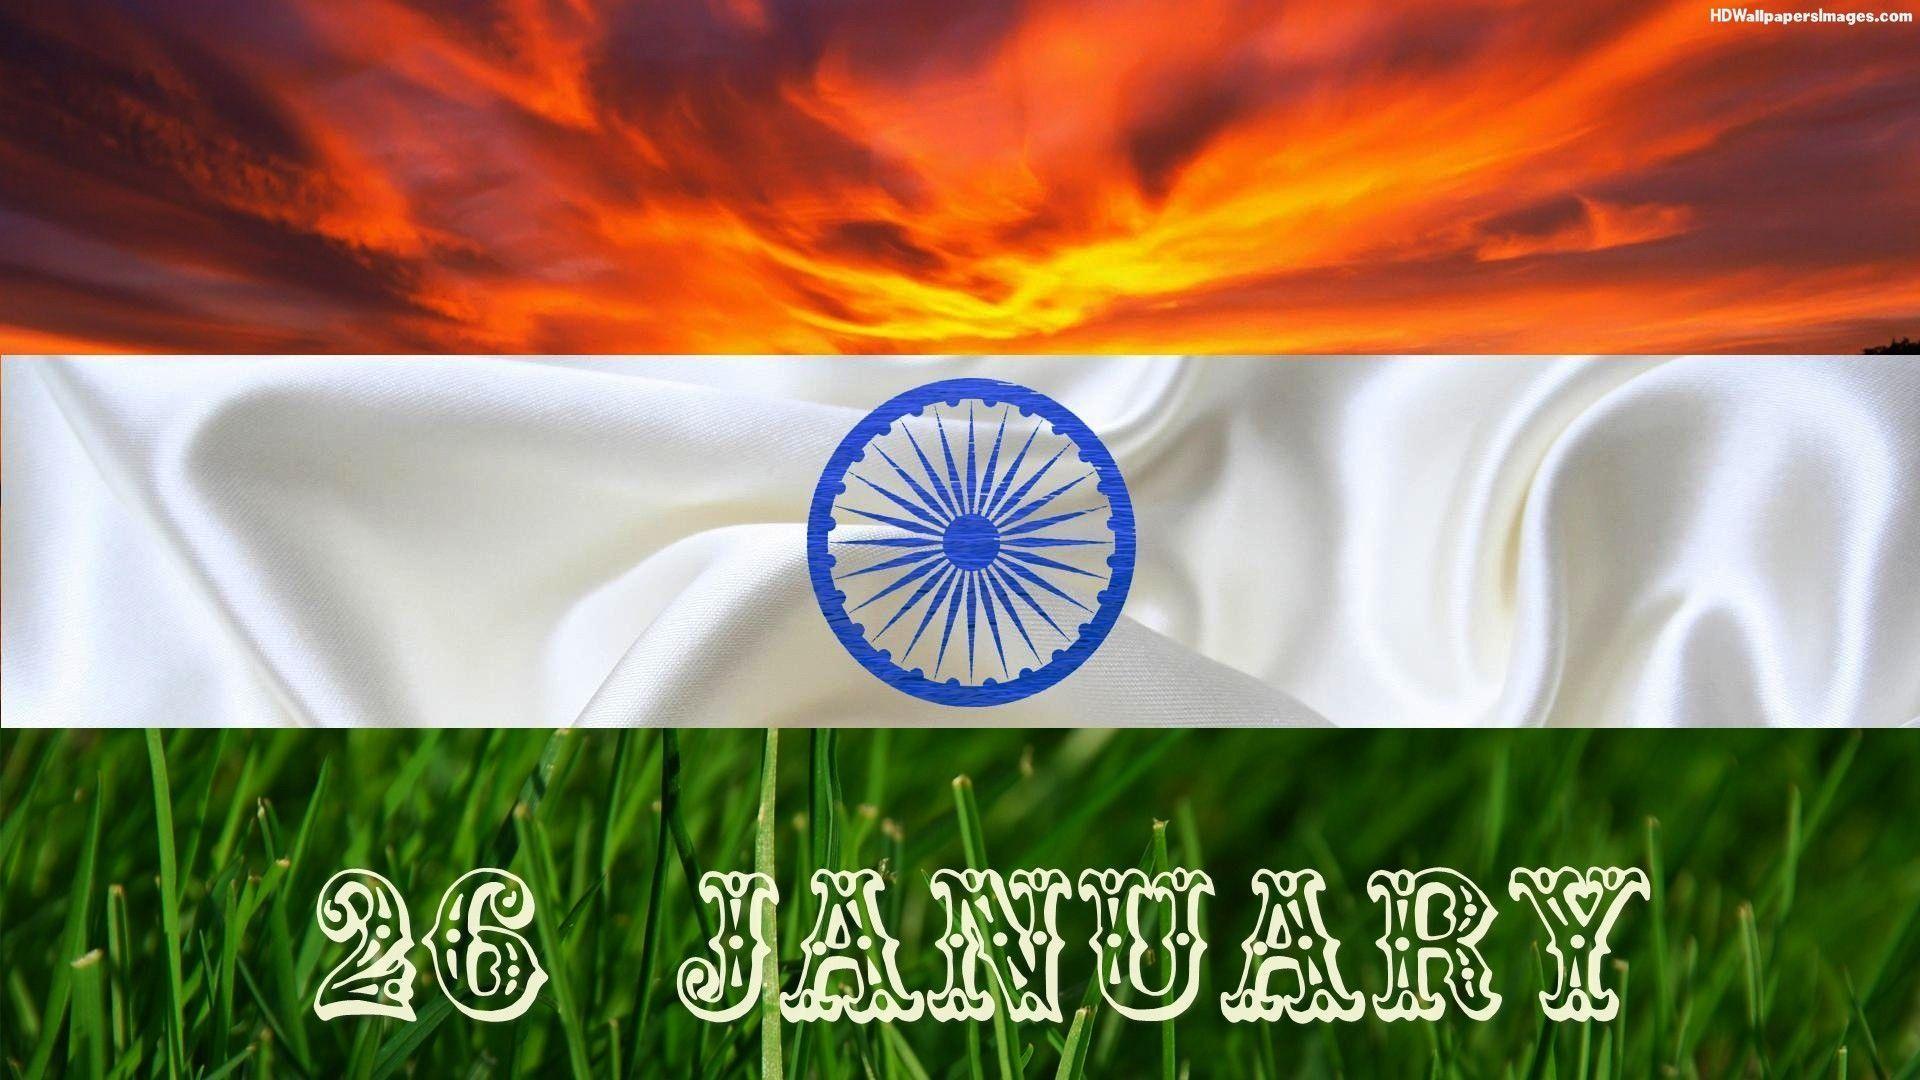 Indian Flag Background 26 January Image. HD Wallpaper Image